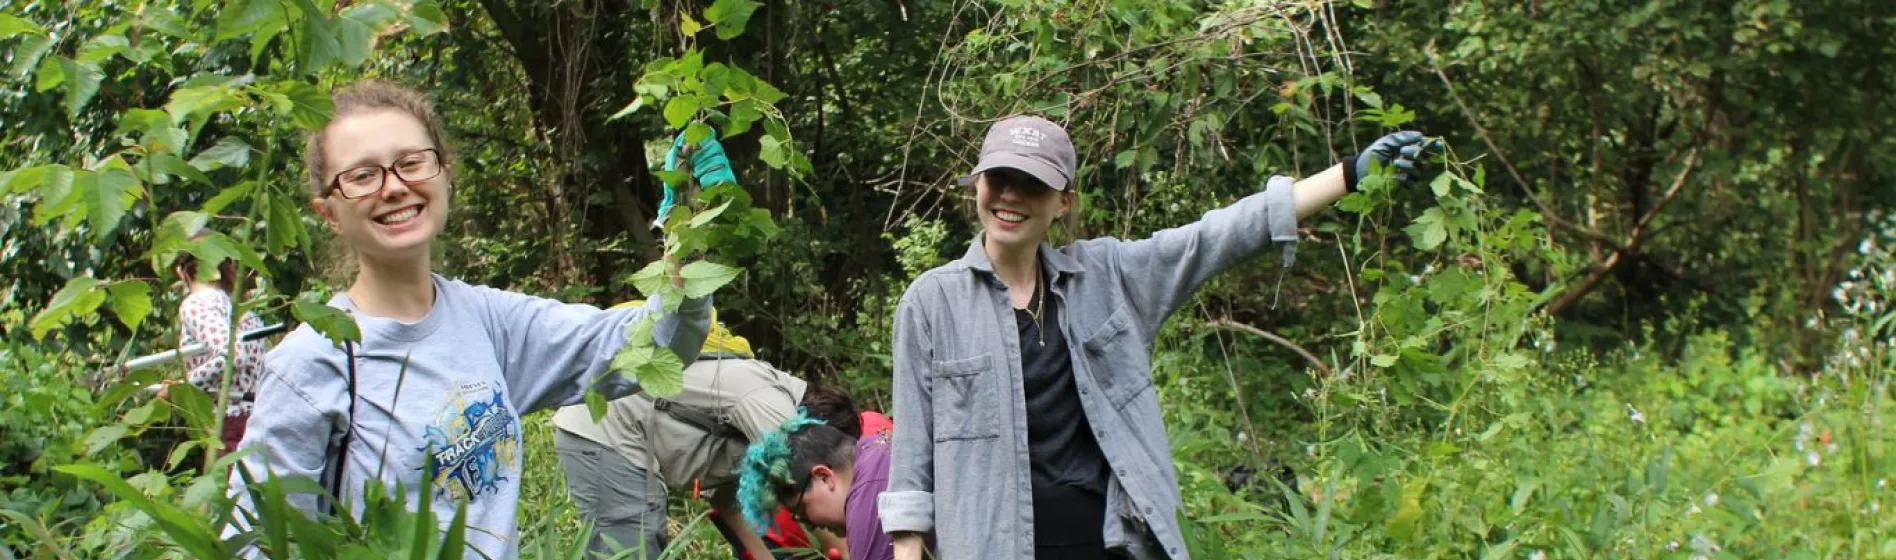 Two National Public Lands Day volunteers hold up invasive species of plant they collected in the forest